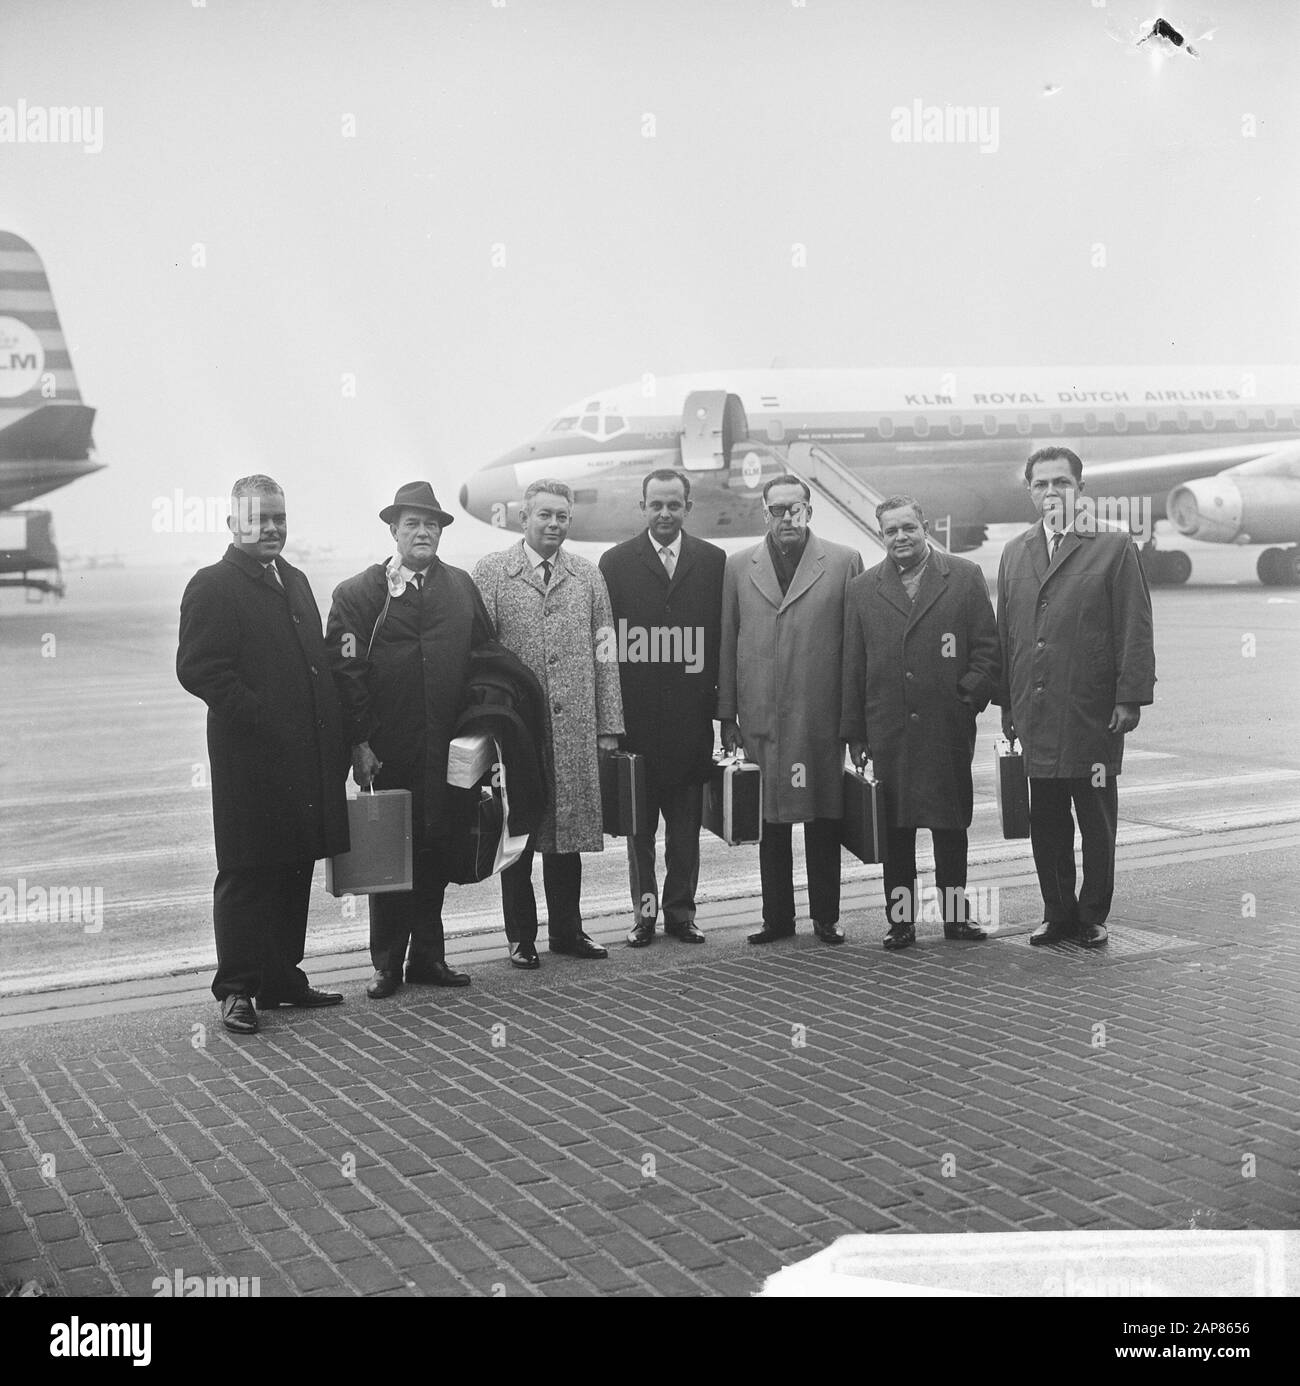 Arrival delegates of Dutch Antilles at Schiphol picked up by Mr. Bikker (left). v.l.n.r. O. Croes (?) , H.L. Braam, E. Voges, L.A. Abraham, C. Wathey, F. Römer (?) and O. Bikker Date: 7 March 1966 Location: Noord-Holland, Schiphol Keywords: arrivals, overseas territories, airports Personal name: Abraham, L.A., Bikker, O., Braam, H.L., Croes, O., Römer, F., Voges, E., Wathey, C. Stock Photo